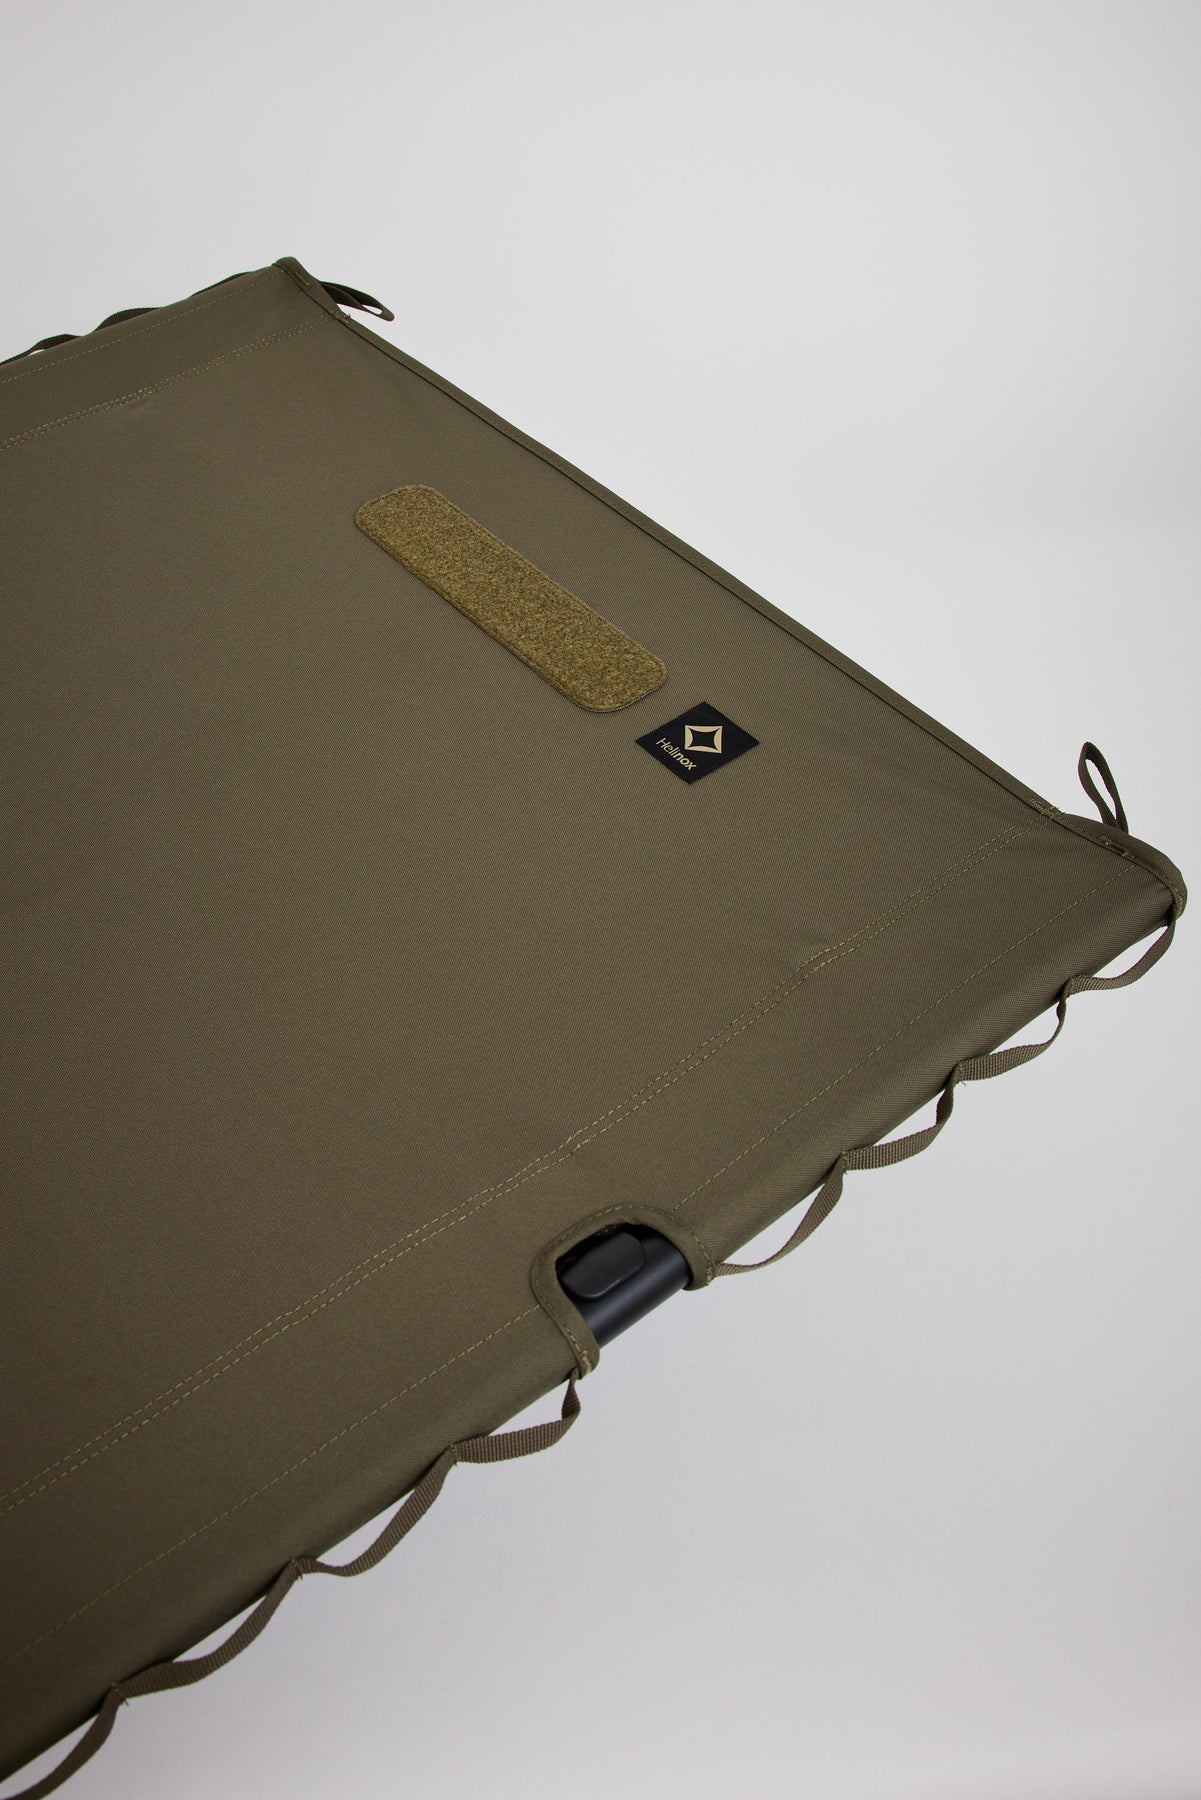 Helinox Tactical Cot Convertible Military Olive/Black   Maplestore